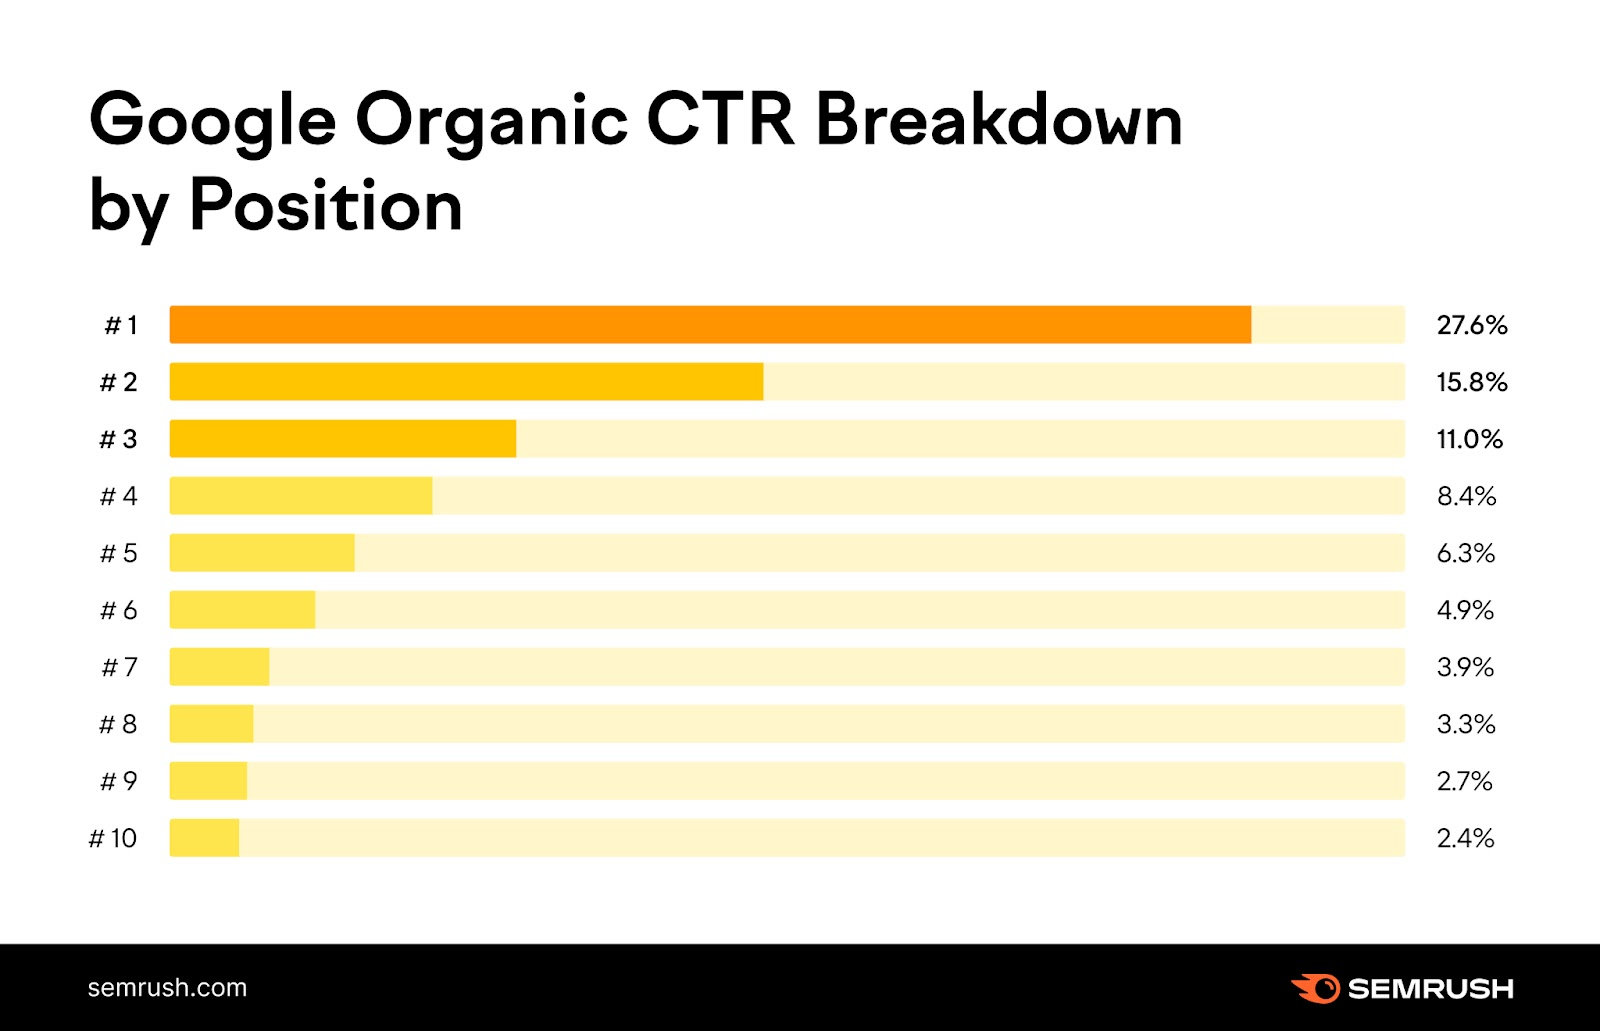 Google organic CTR by position showing the top result gets 27.6% of clicks, with this decreasing down to position 10 that gets 2.4% of clicks.